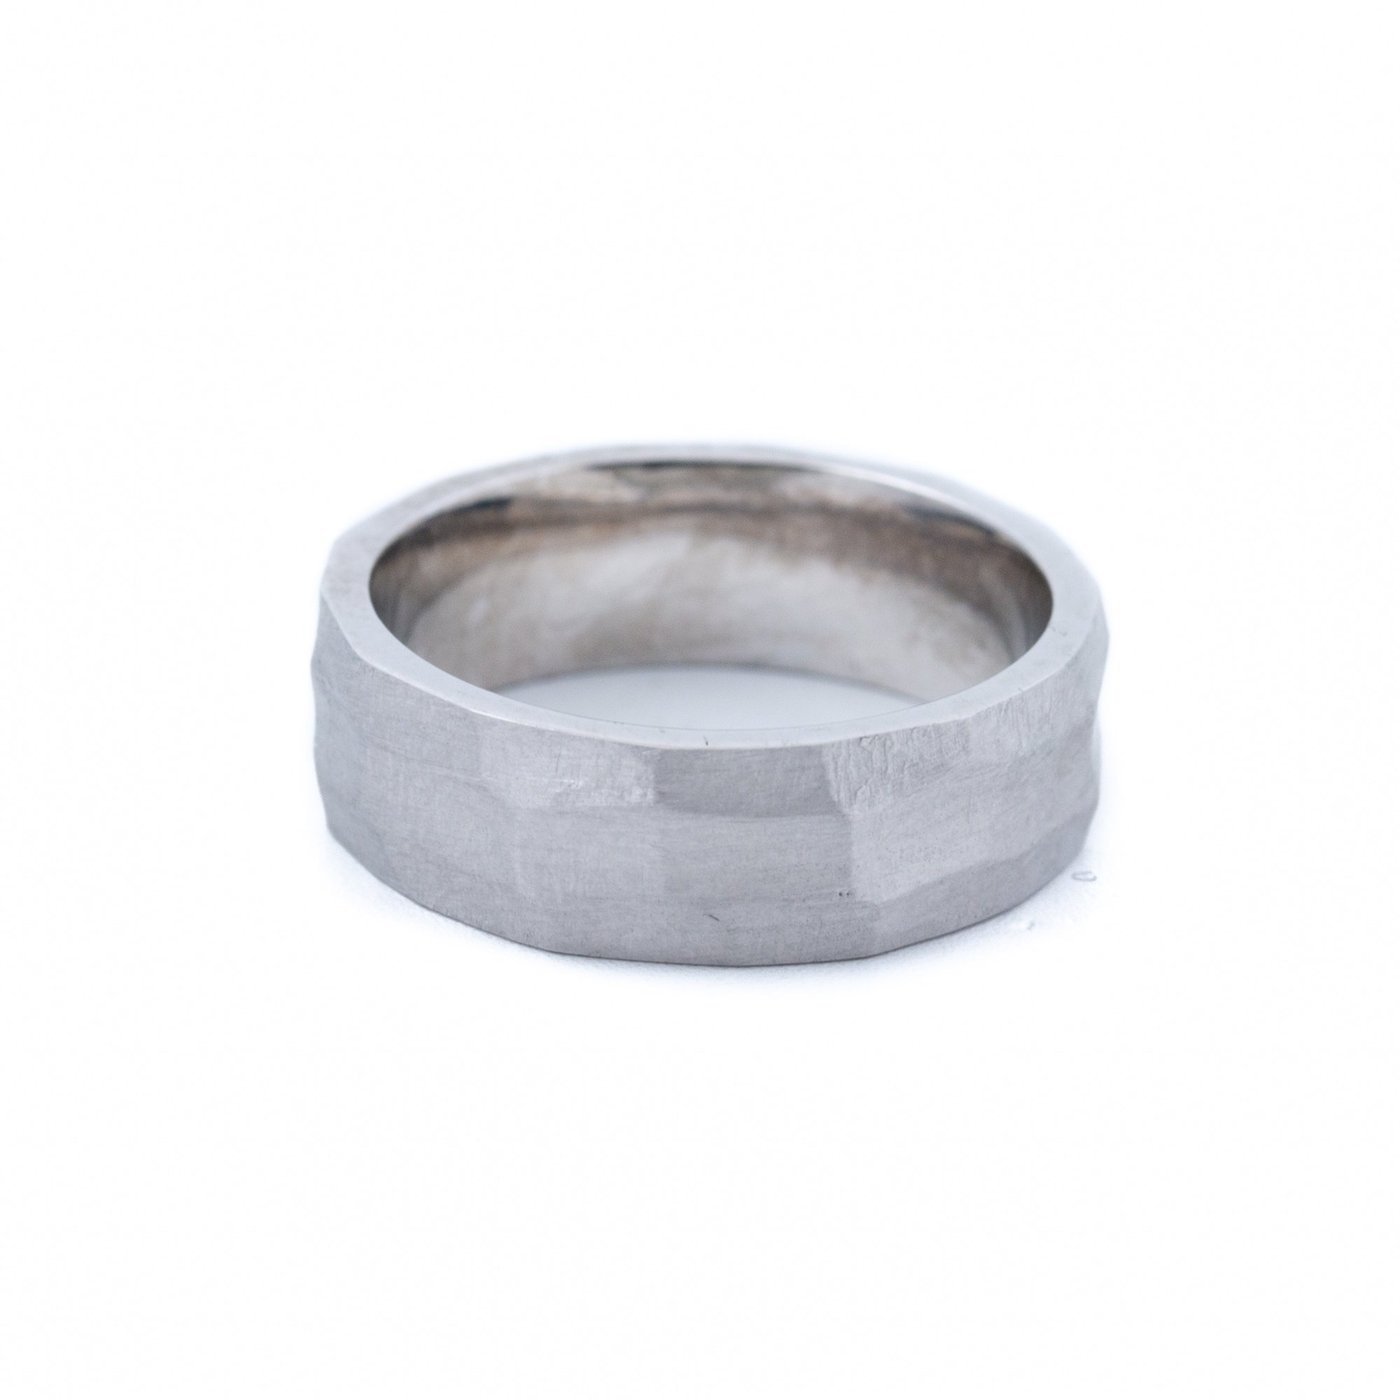 Wavy x Sterling Silver Band Ring - Kingdom Jewelry